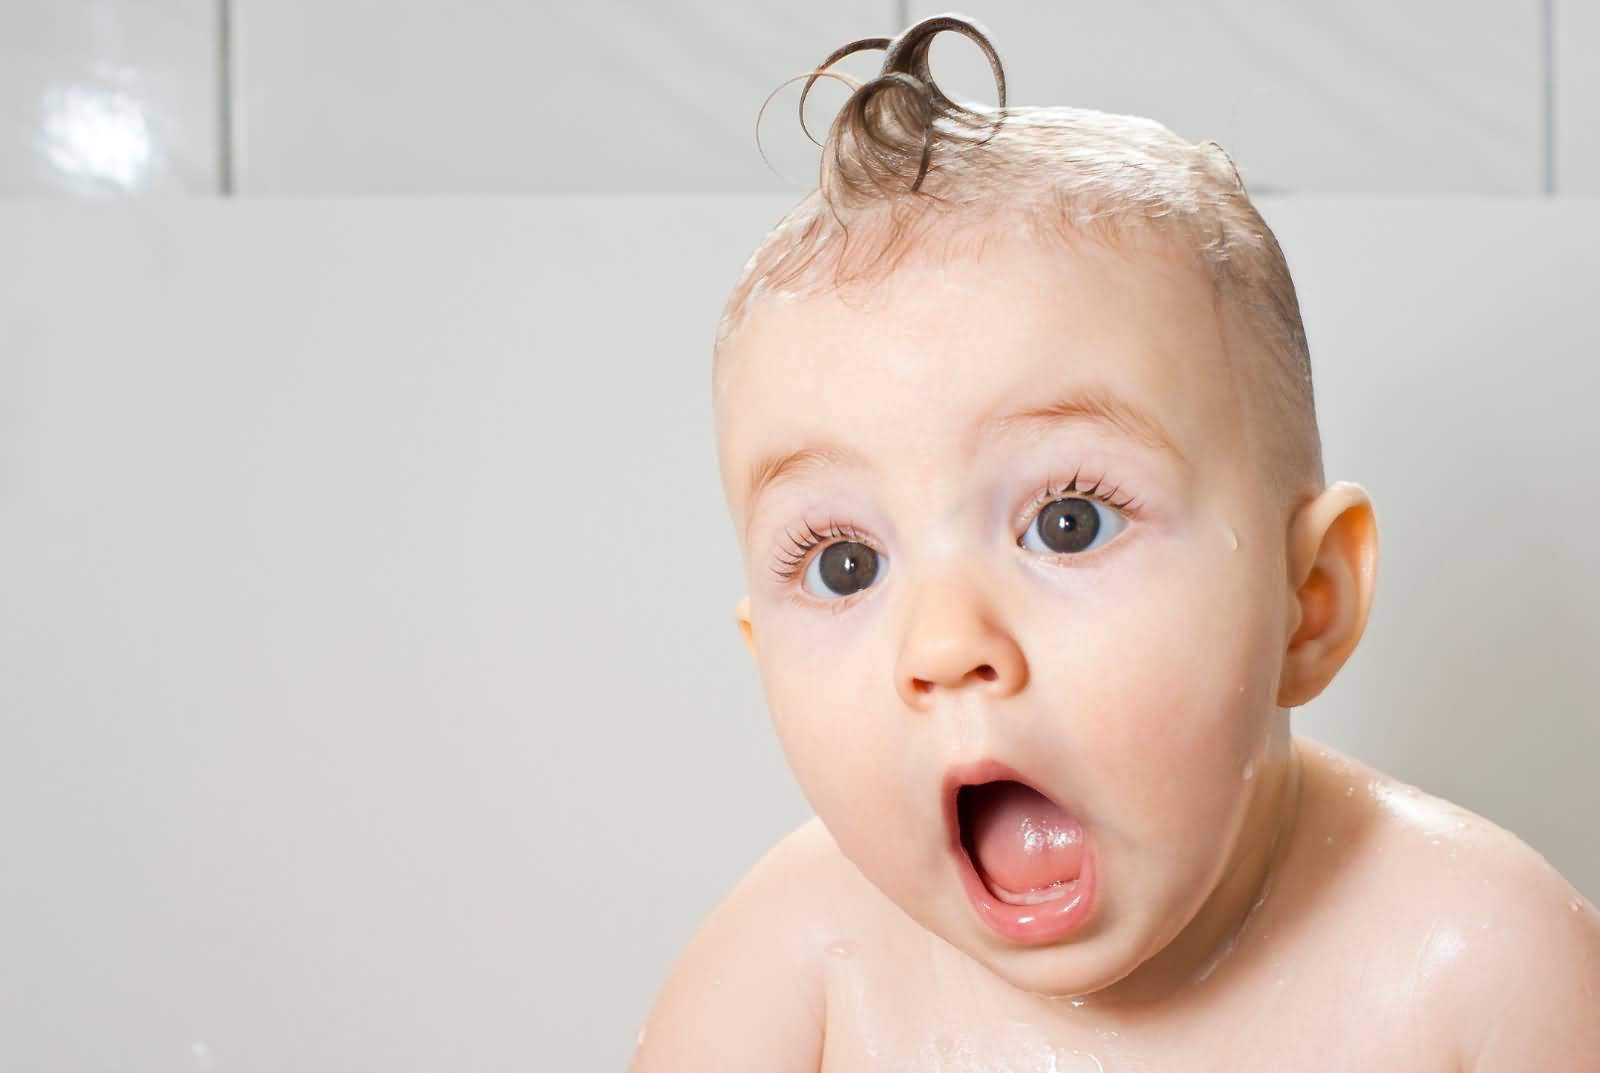 Surprised Funny Baby Face Image